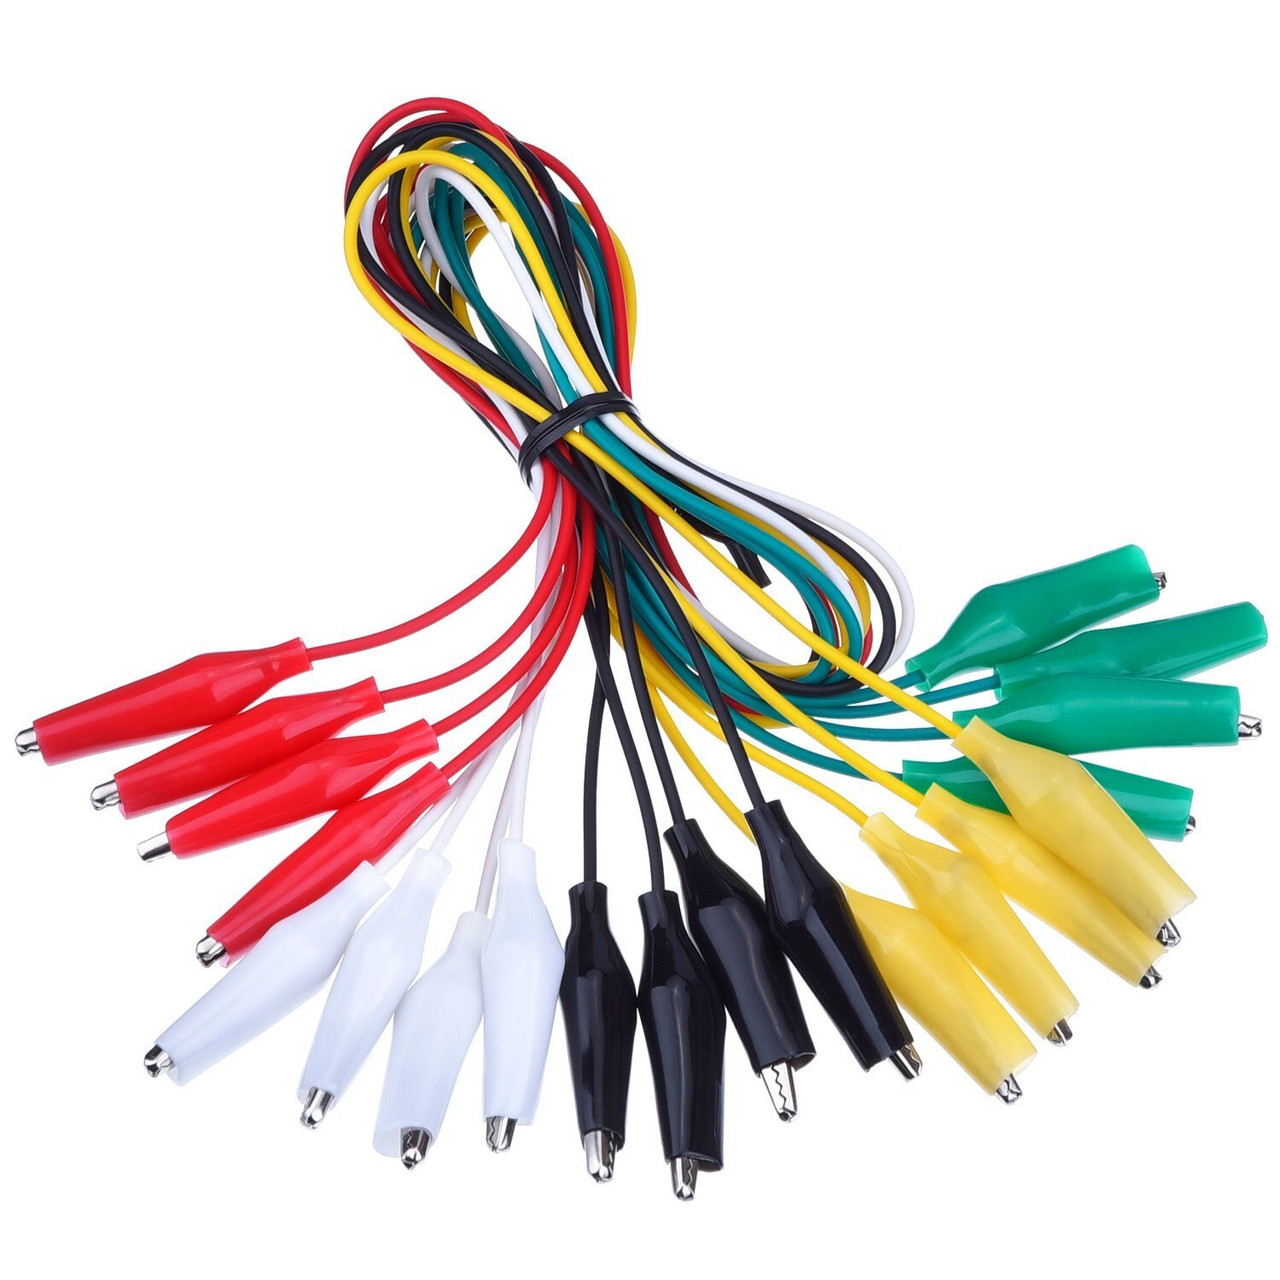 55cm Vikenner 10 Pcs Colorful Double Ended Alligator Crocodile Clips Test Lead Jumper Wire Cable 5 Colors